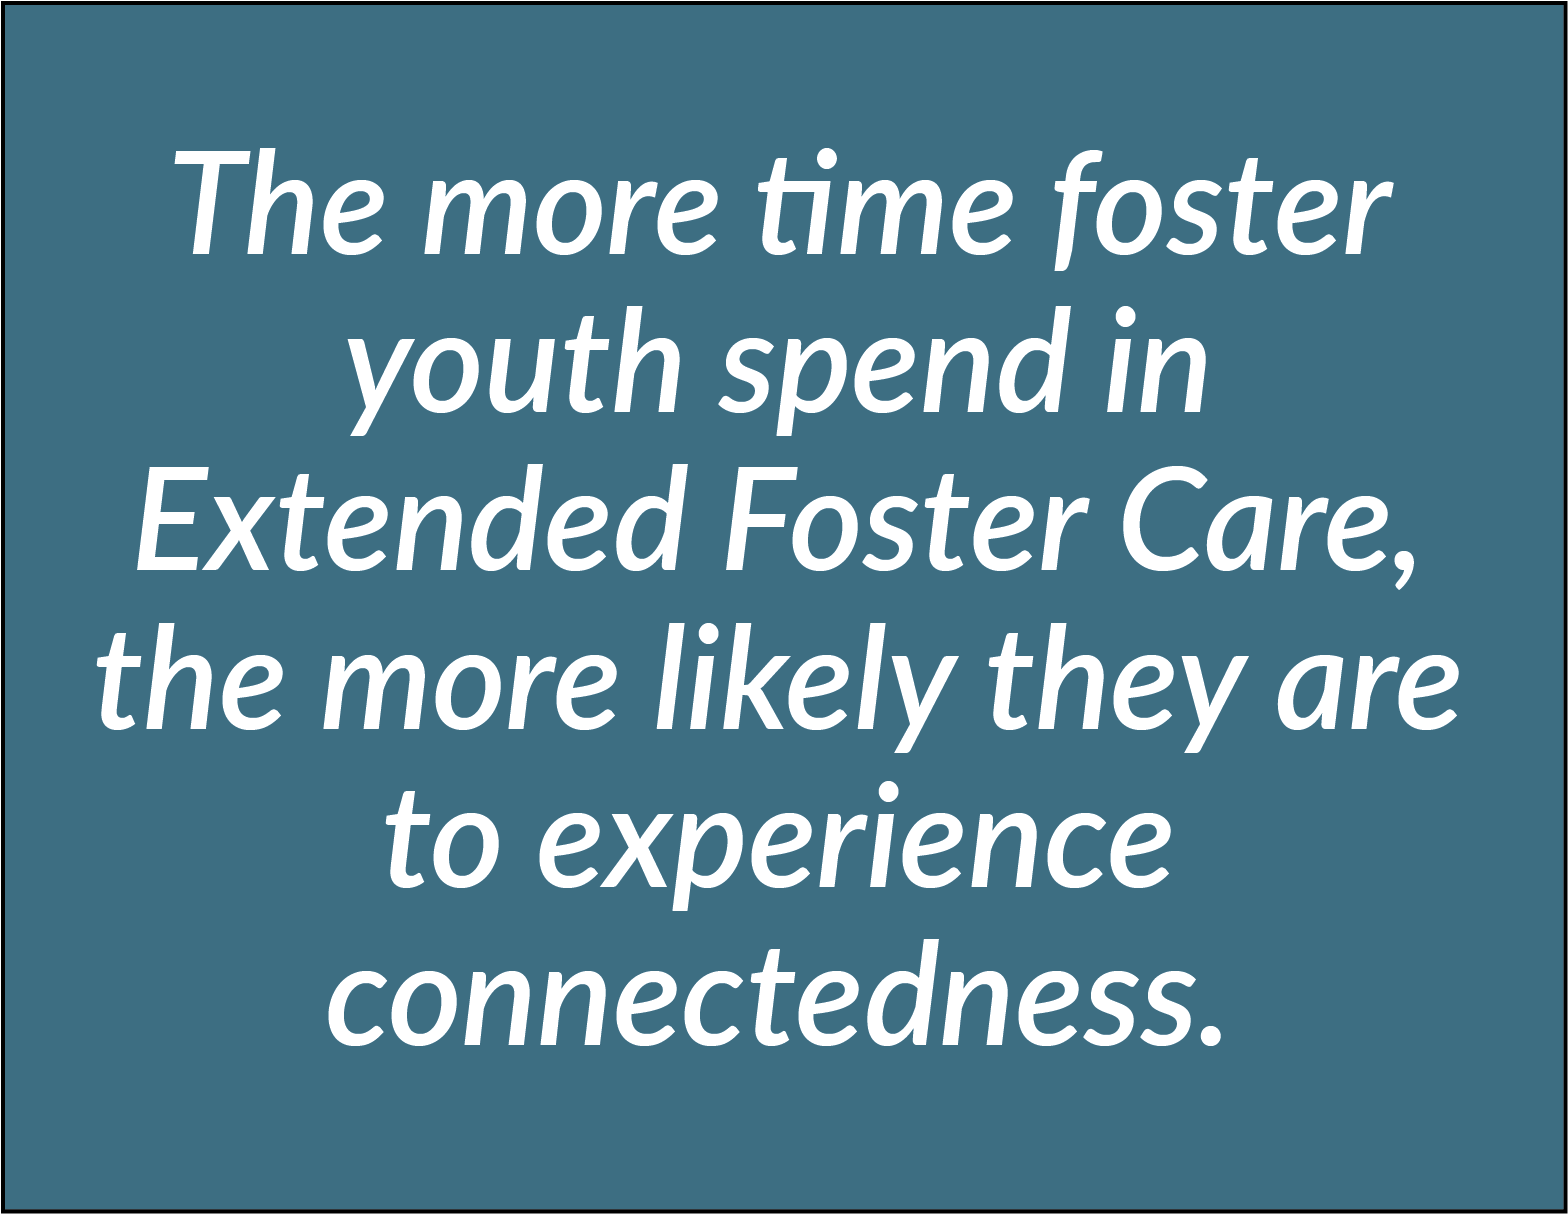 Text box: The more time foster youth spend in Extended Foster Care, the more likely they are to experience connectedness.